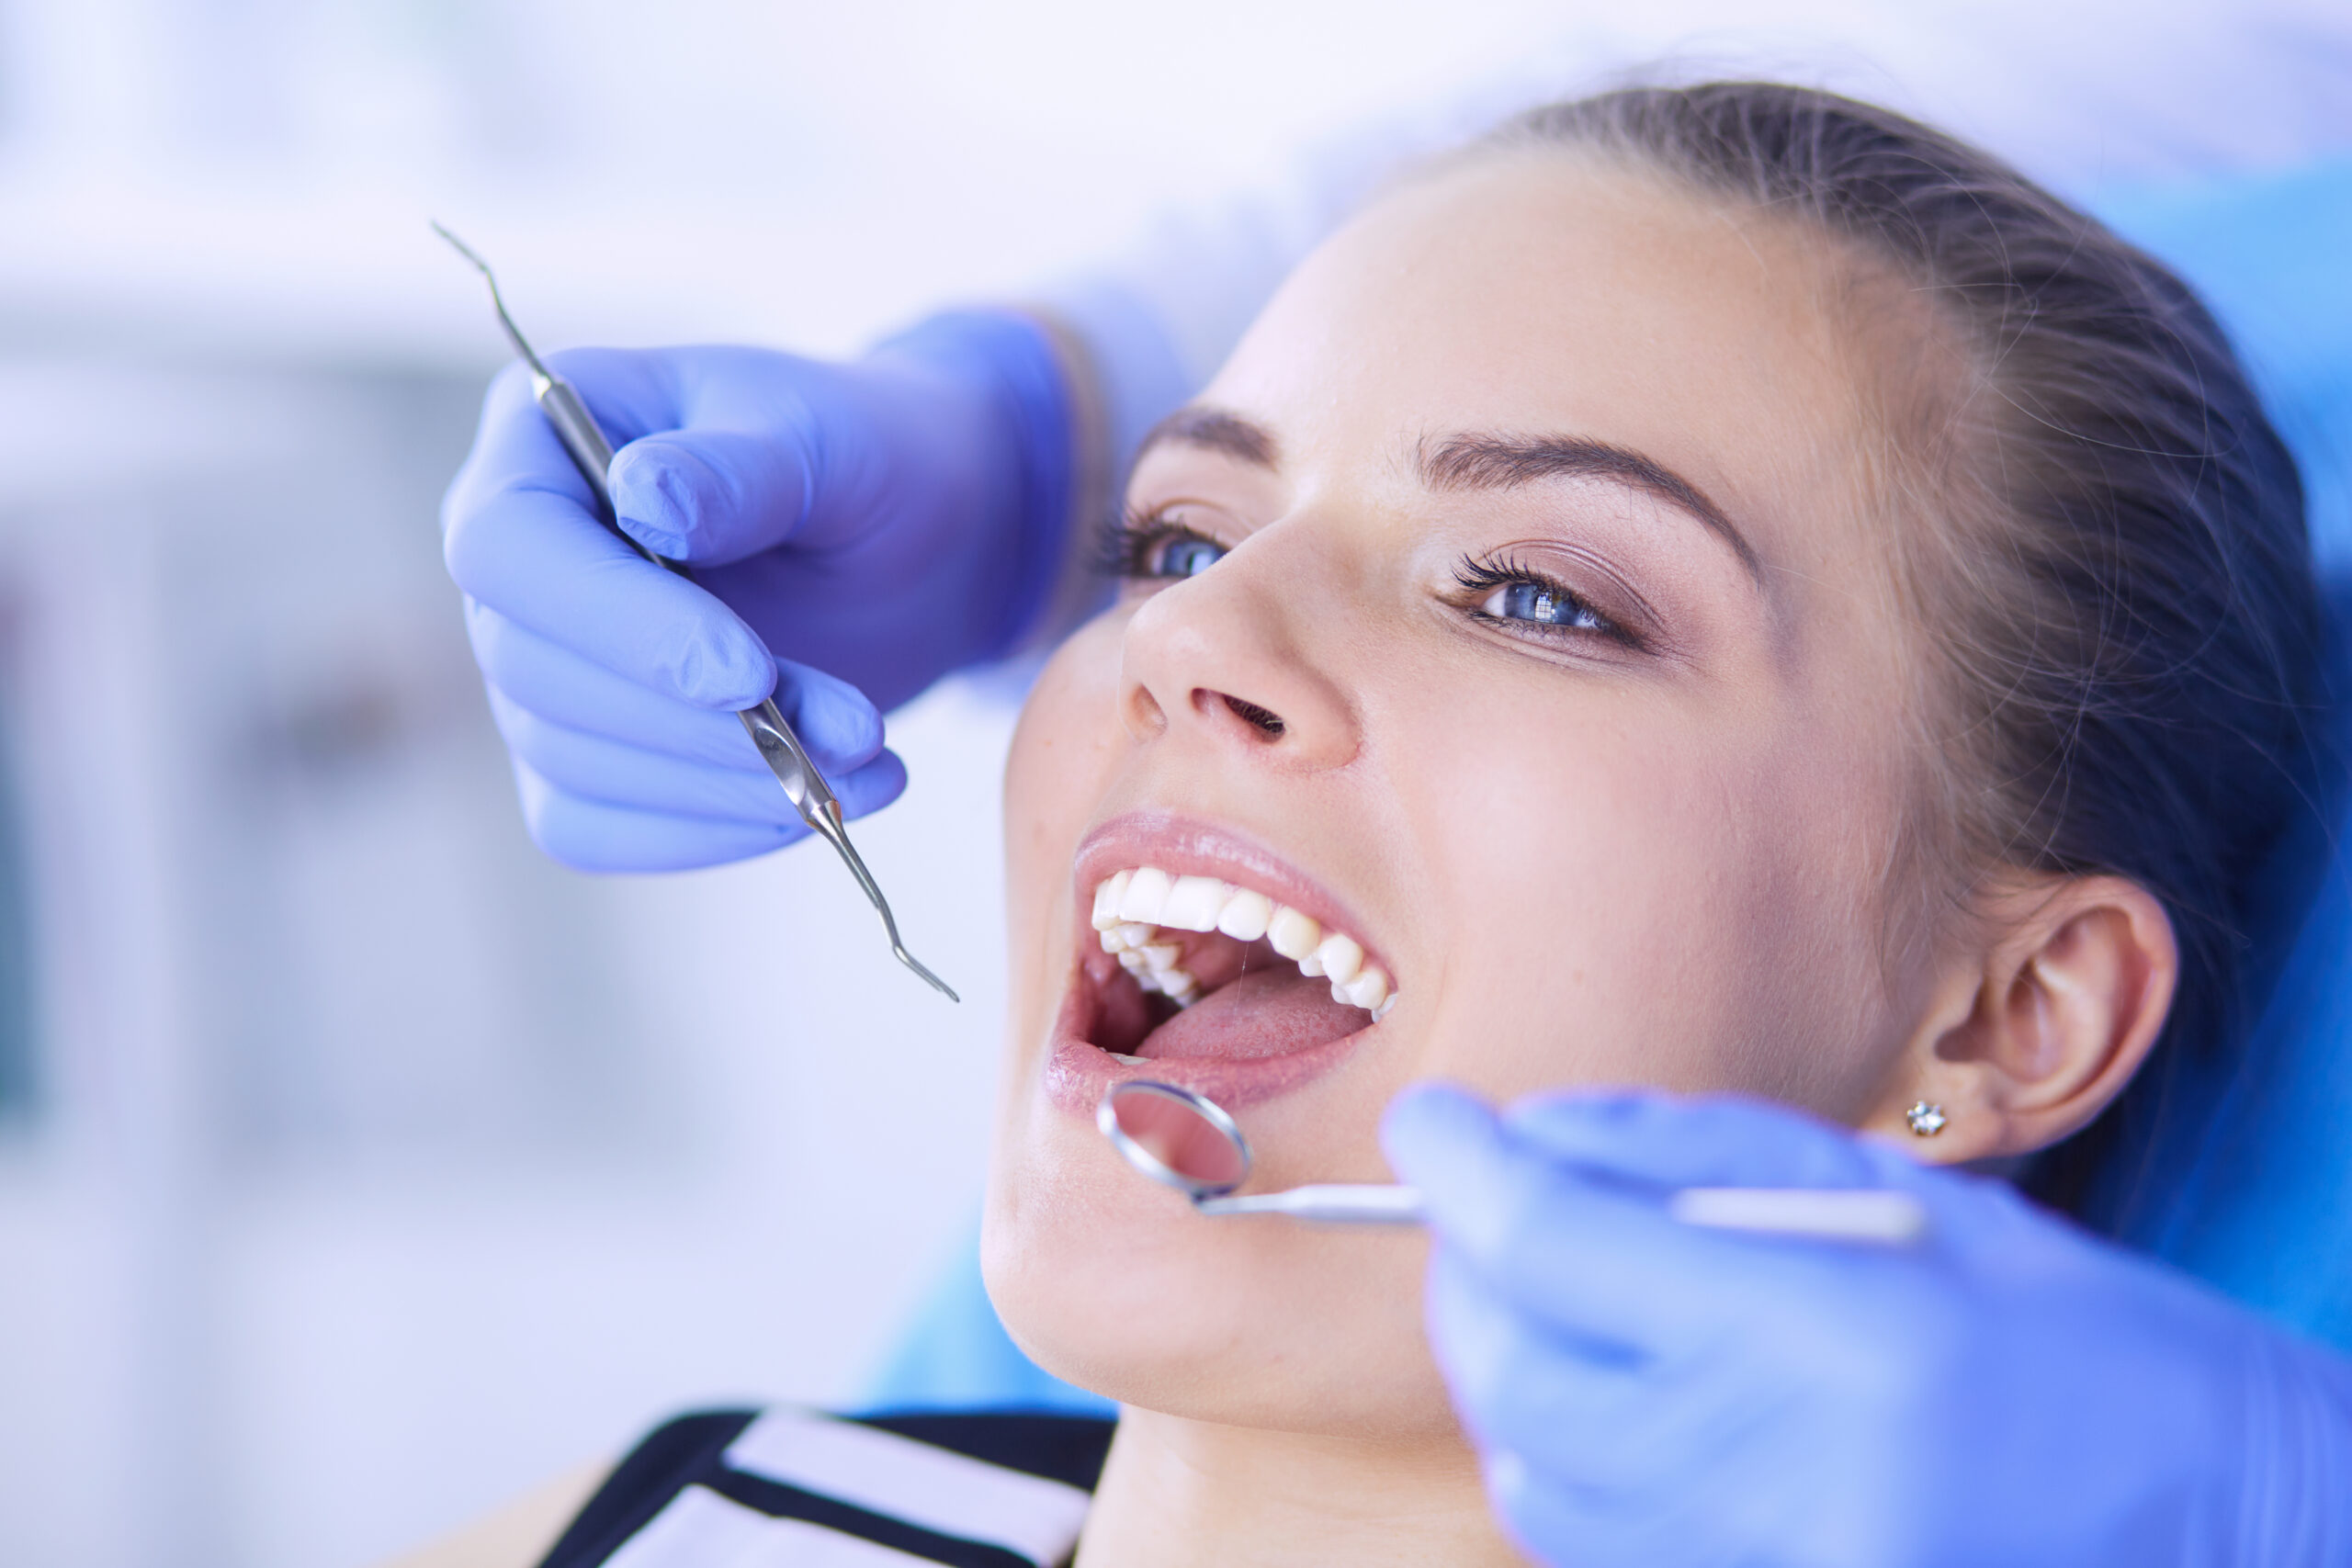 How Long Do Dental Cleanings Take? What You Should Expect